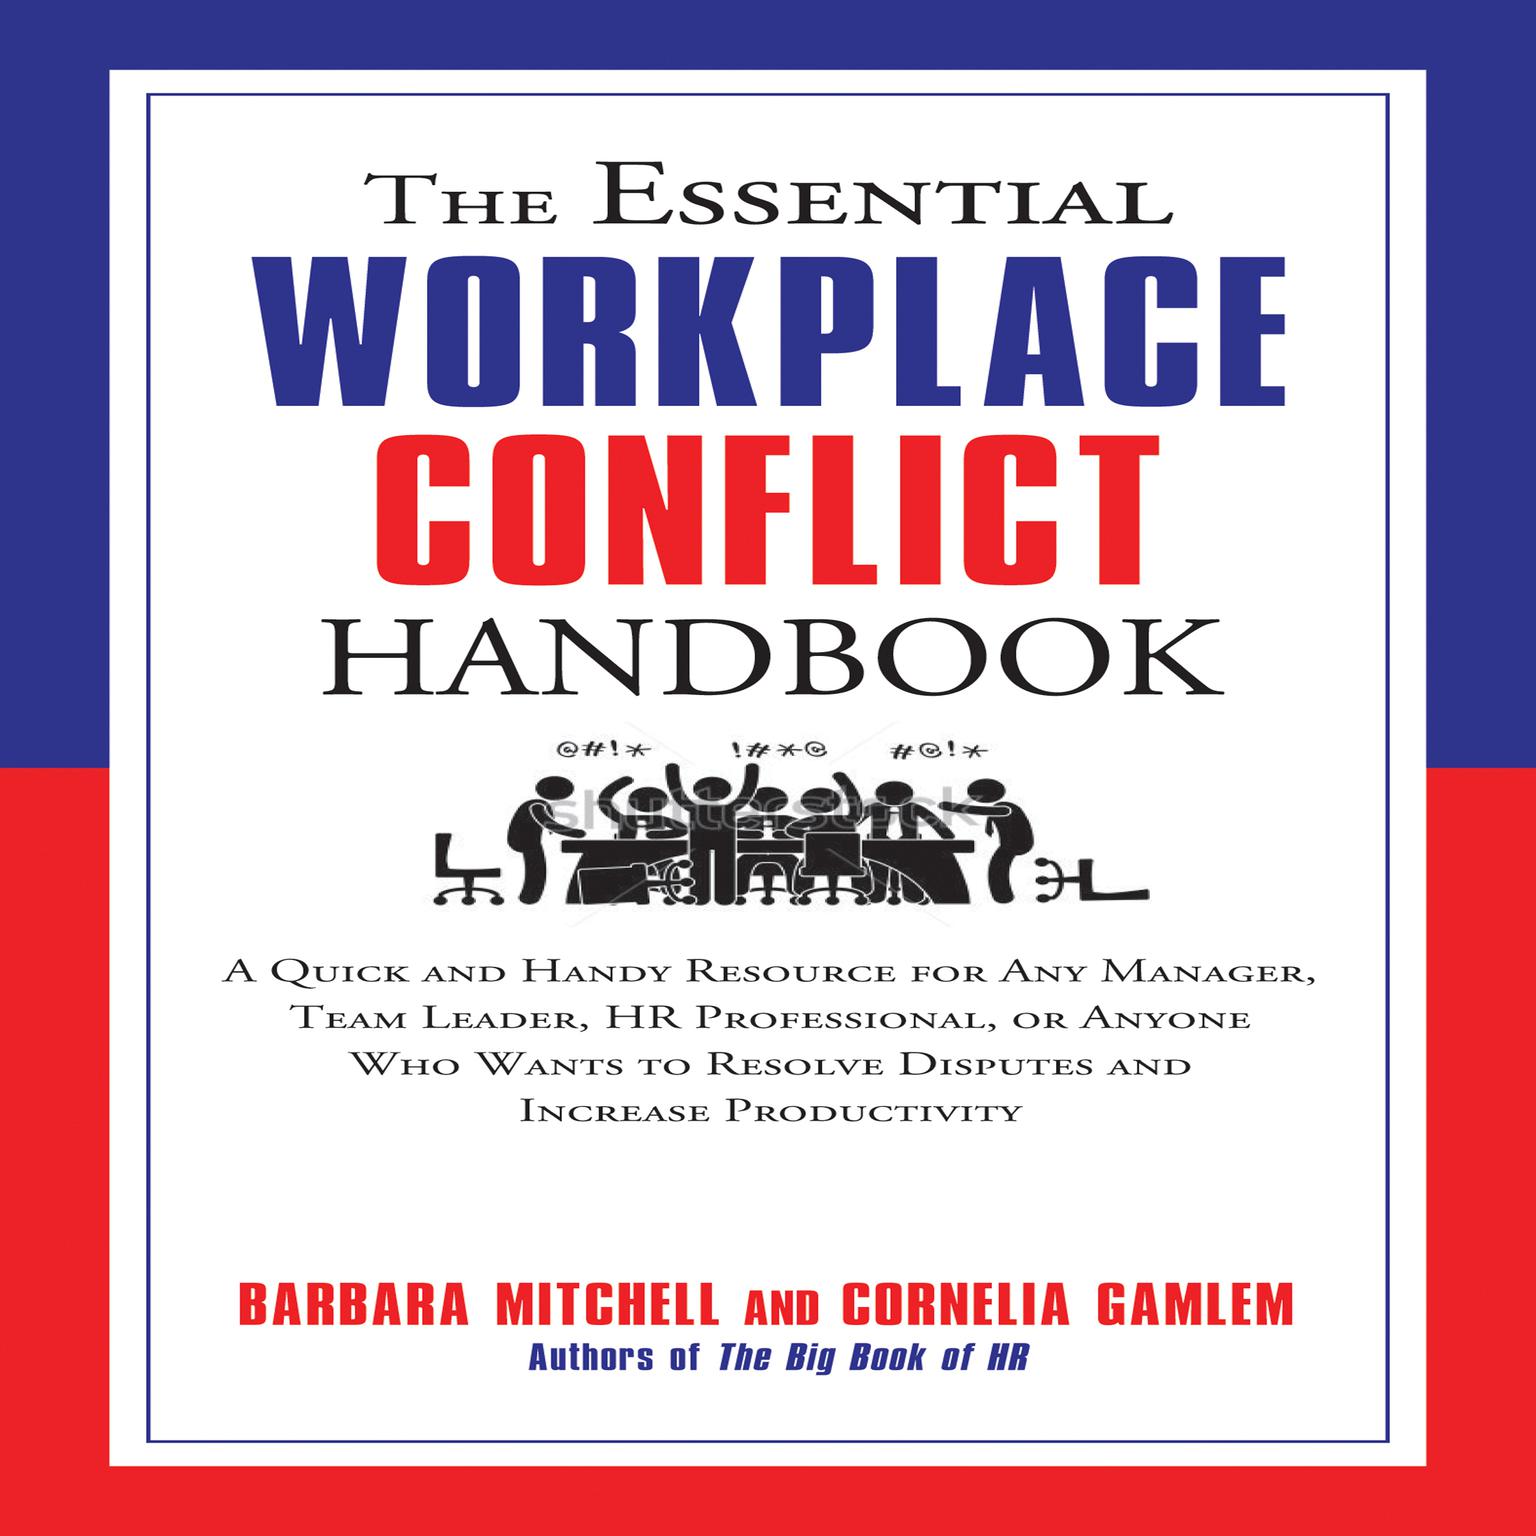 The Essential Workplace Conflict Handbook: A Quick and Handy Resource for Any Manager, Team Leader, HR Professional, Or Anyone Who Wants to Resolve Disputes and Increase Productivity Audiobook, by Barbara Mitchell